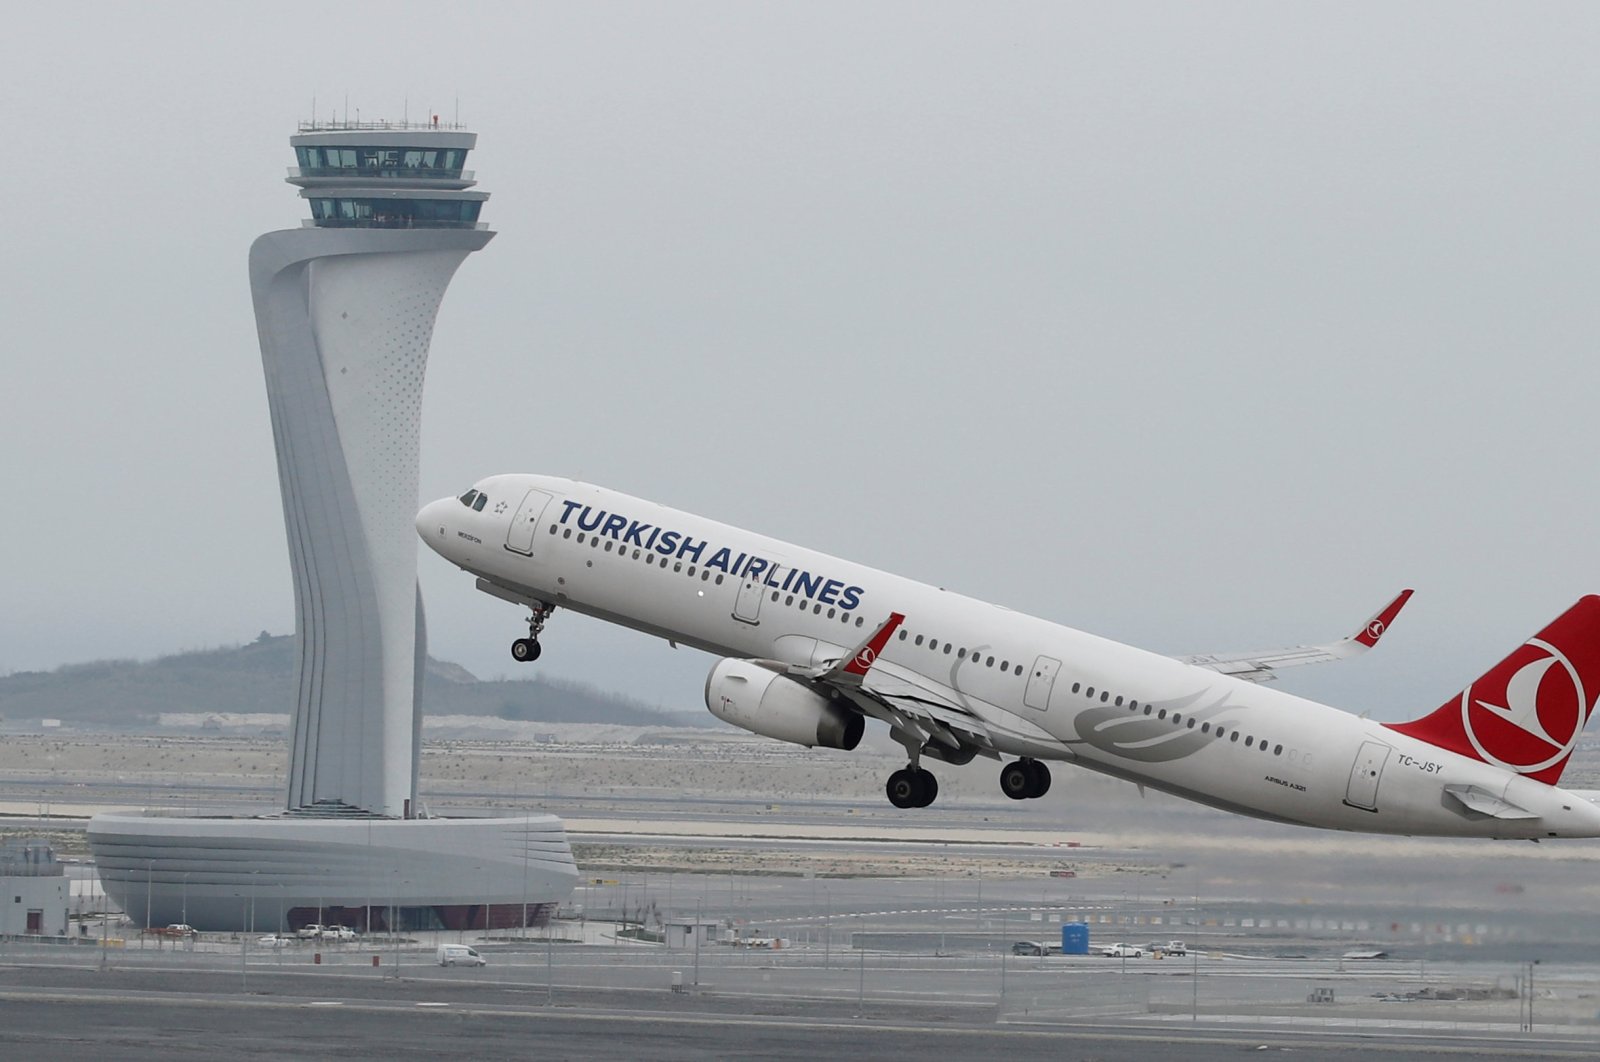 A Turkish Airlines Airbus A321-200 plane takes off from the city's new Istanbul Airport in Istanbul, Turkey, April 6, 2019. (REUTERS Photo)